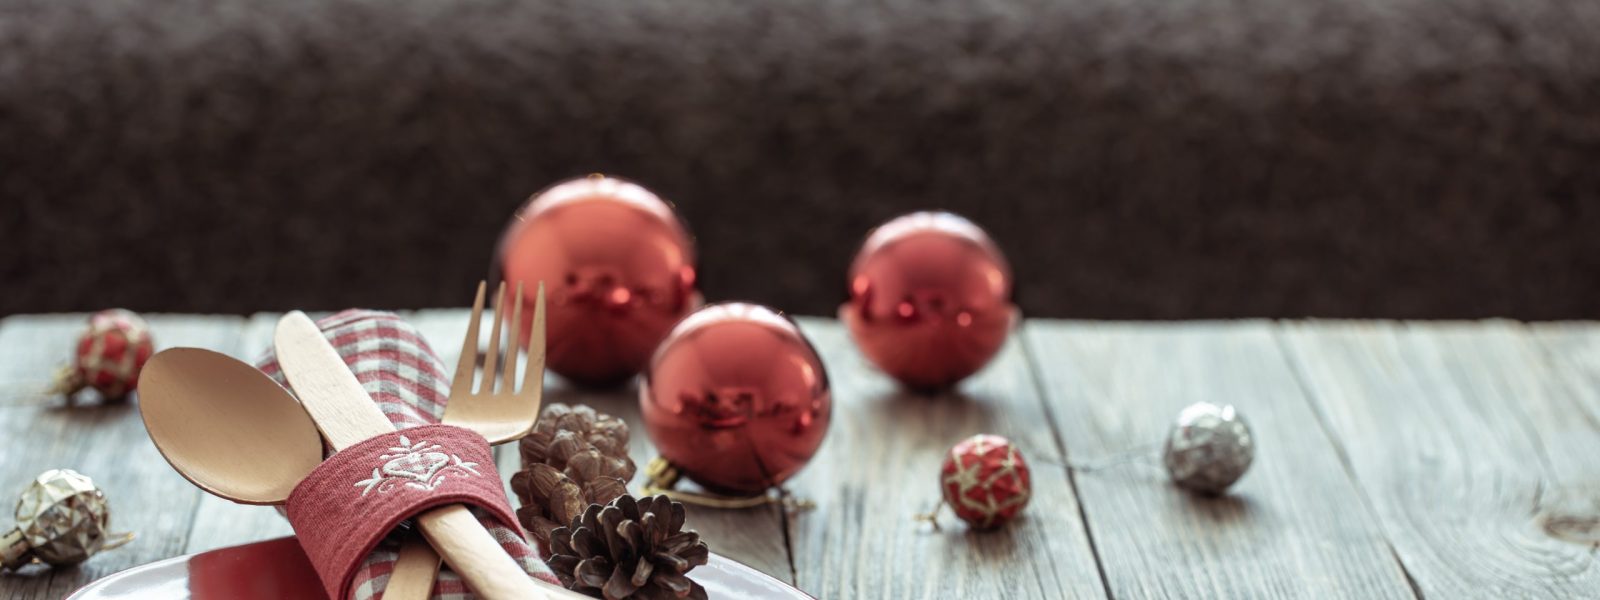 Close up of Christmas festive table setting on blurred dark background with bokeh, copy space.